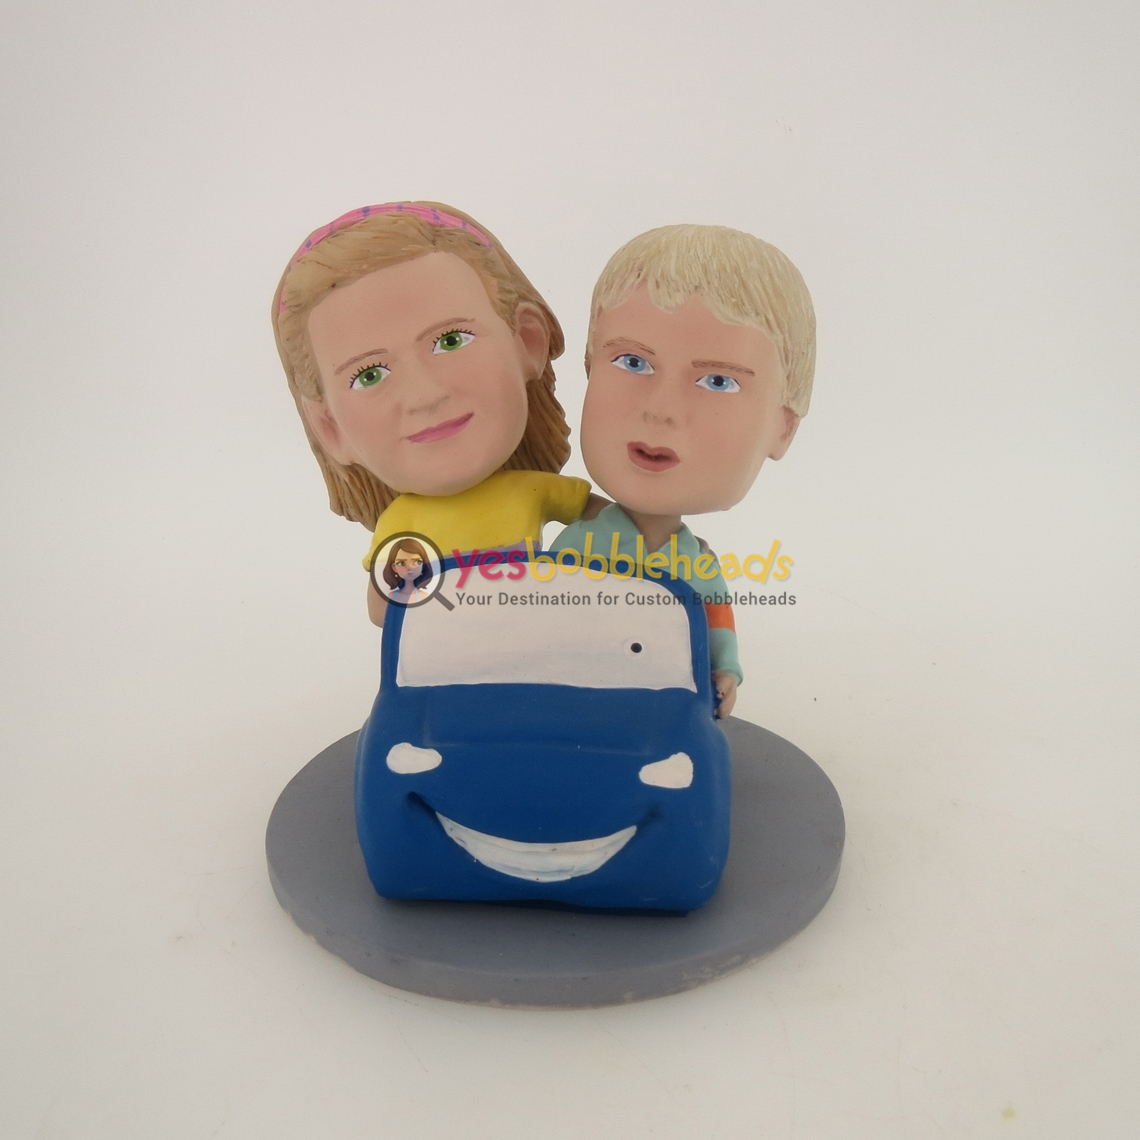 Picture of Custom Bobblehead Doll: Driving Couple